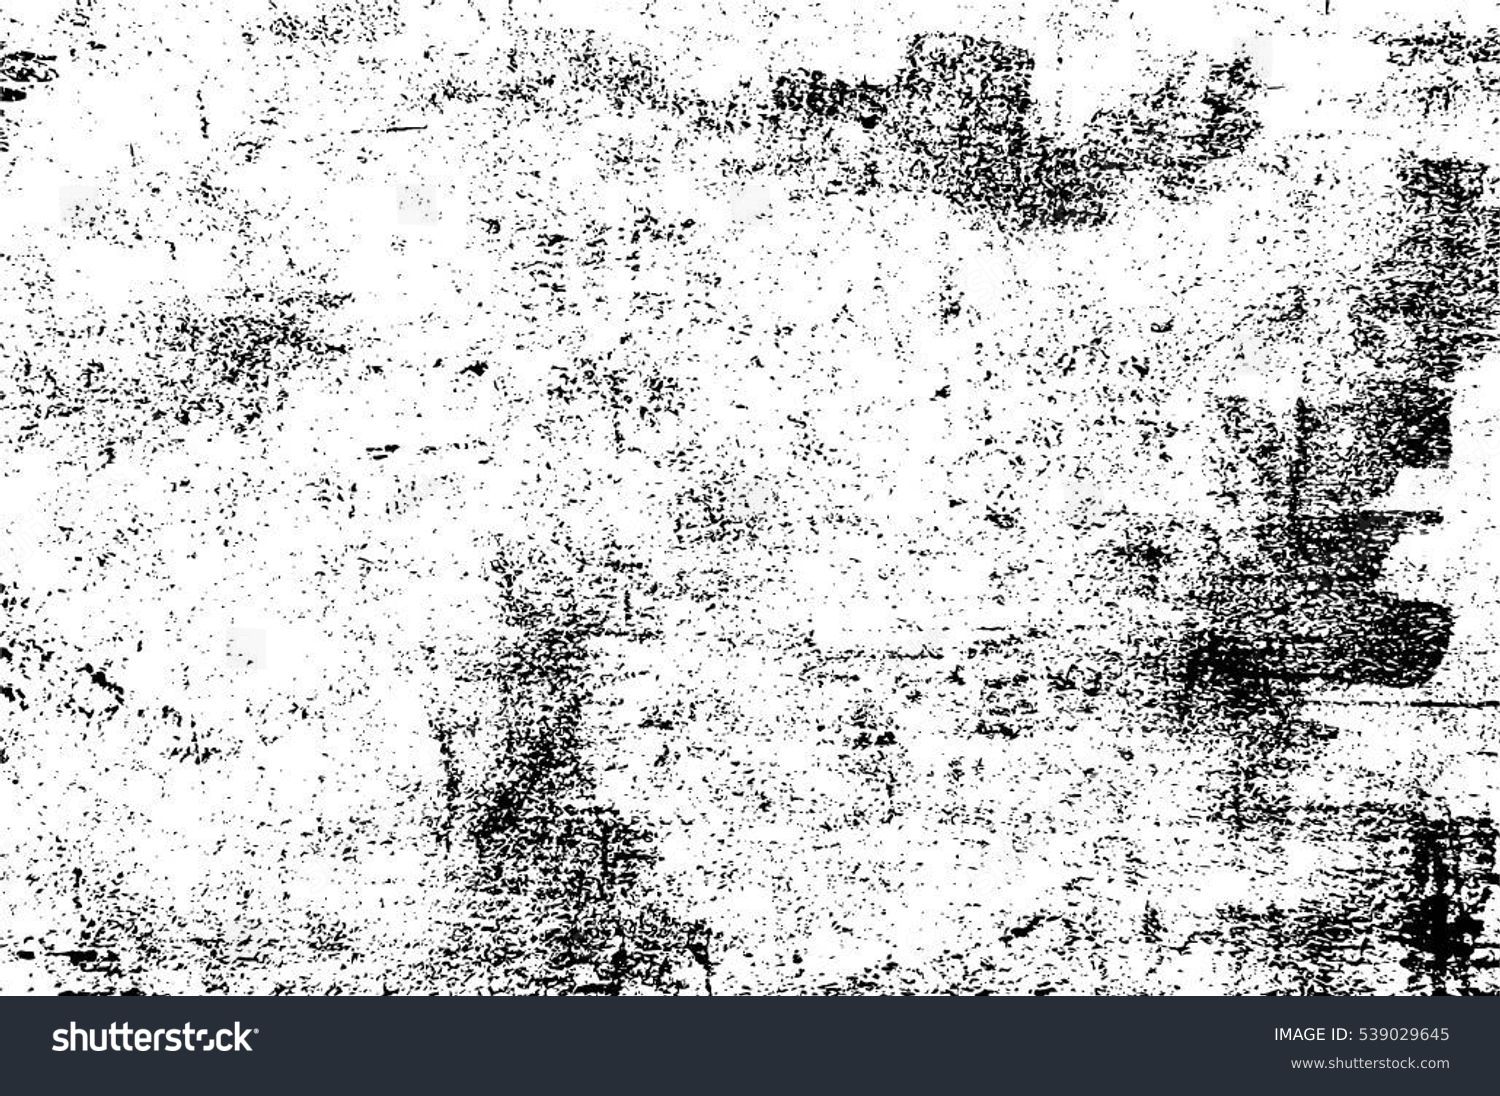 Grunge Black And White Urban Vector Texture Template. Dark Messy Dust Overlay Distress Background. Easy To Create Abstract Dotted, Scratched, Vintage Effect With Noise And Grain #539029645